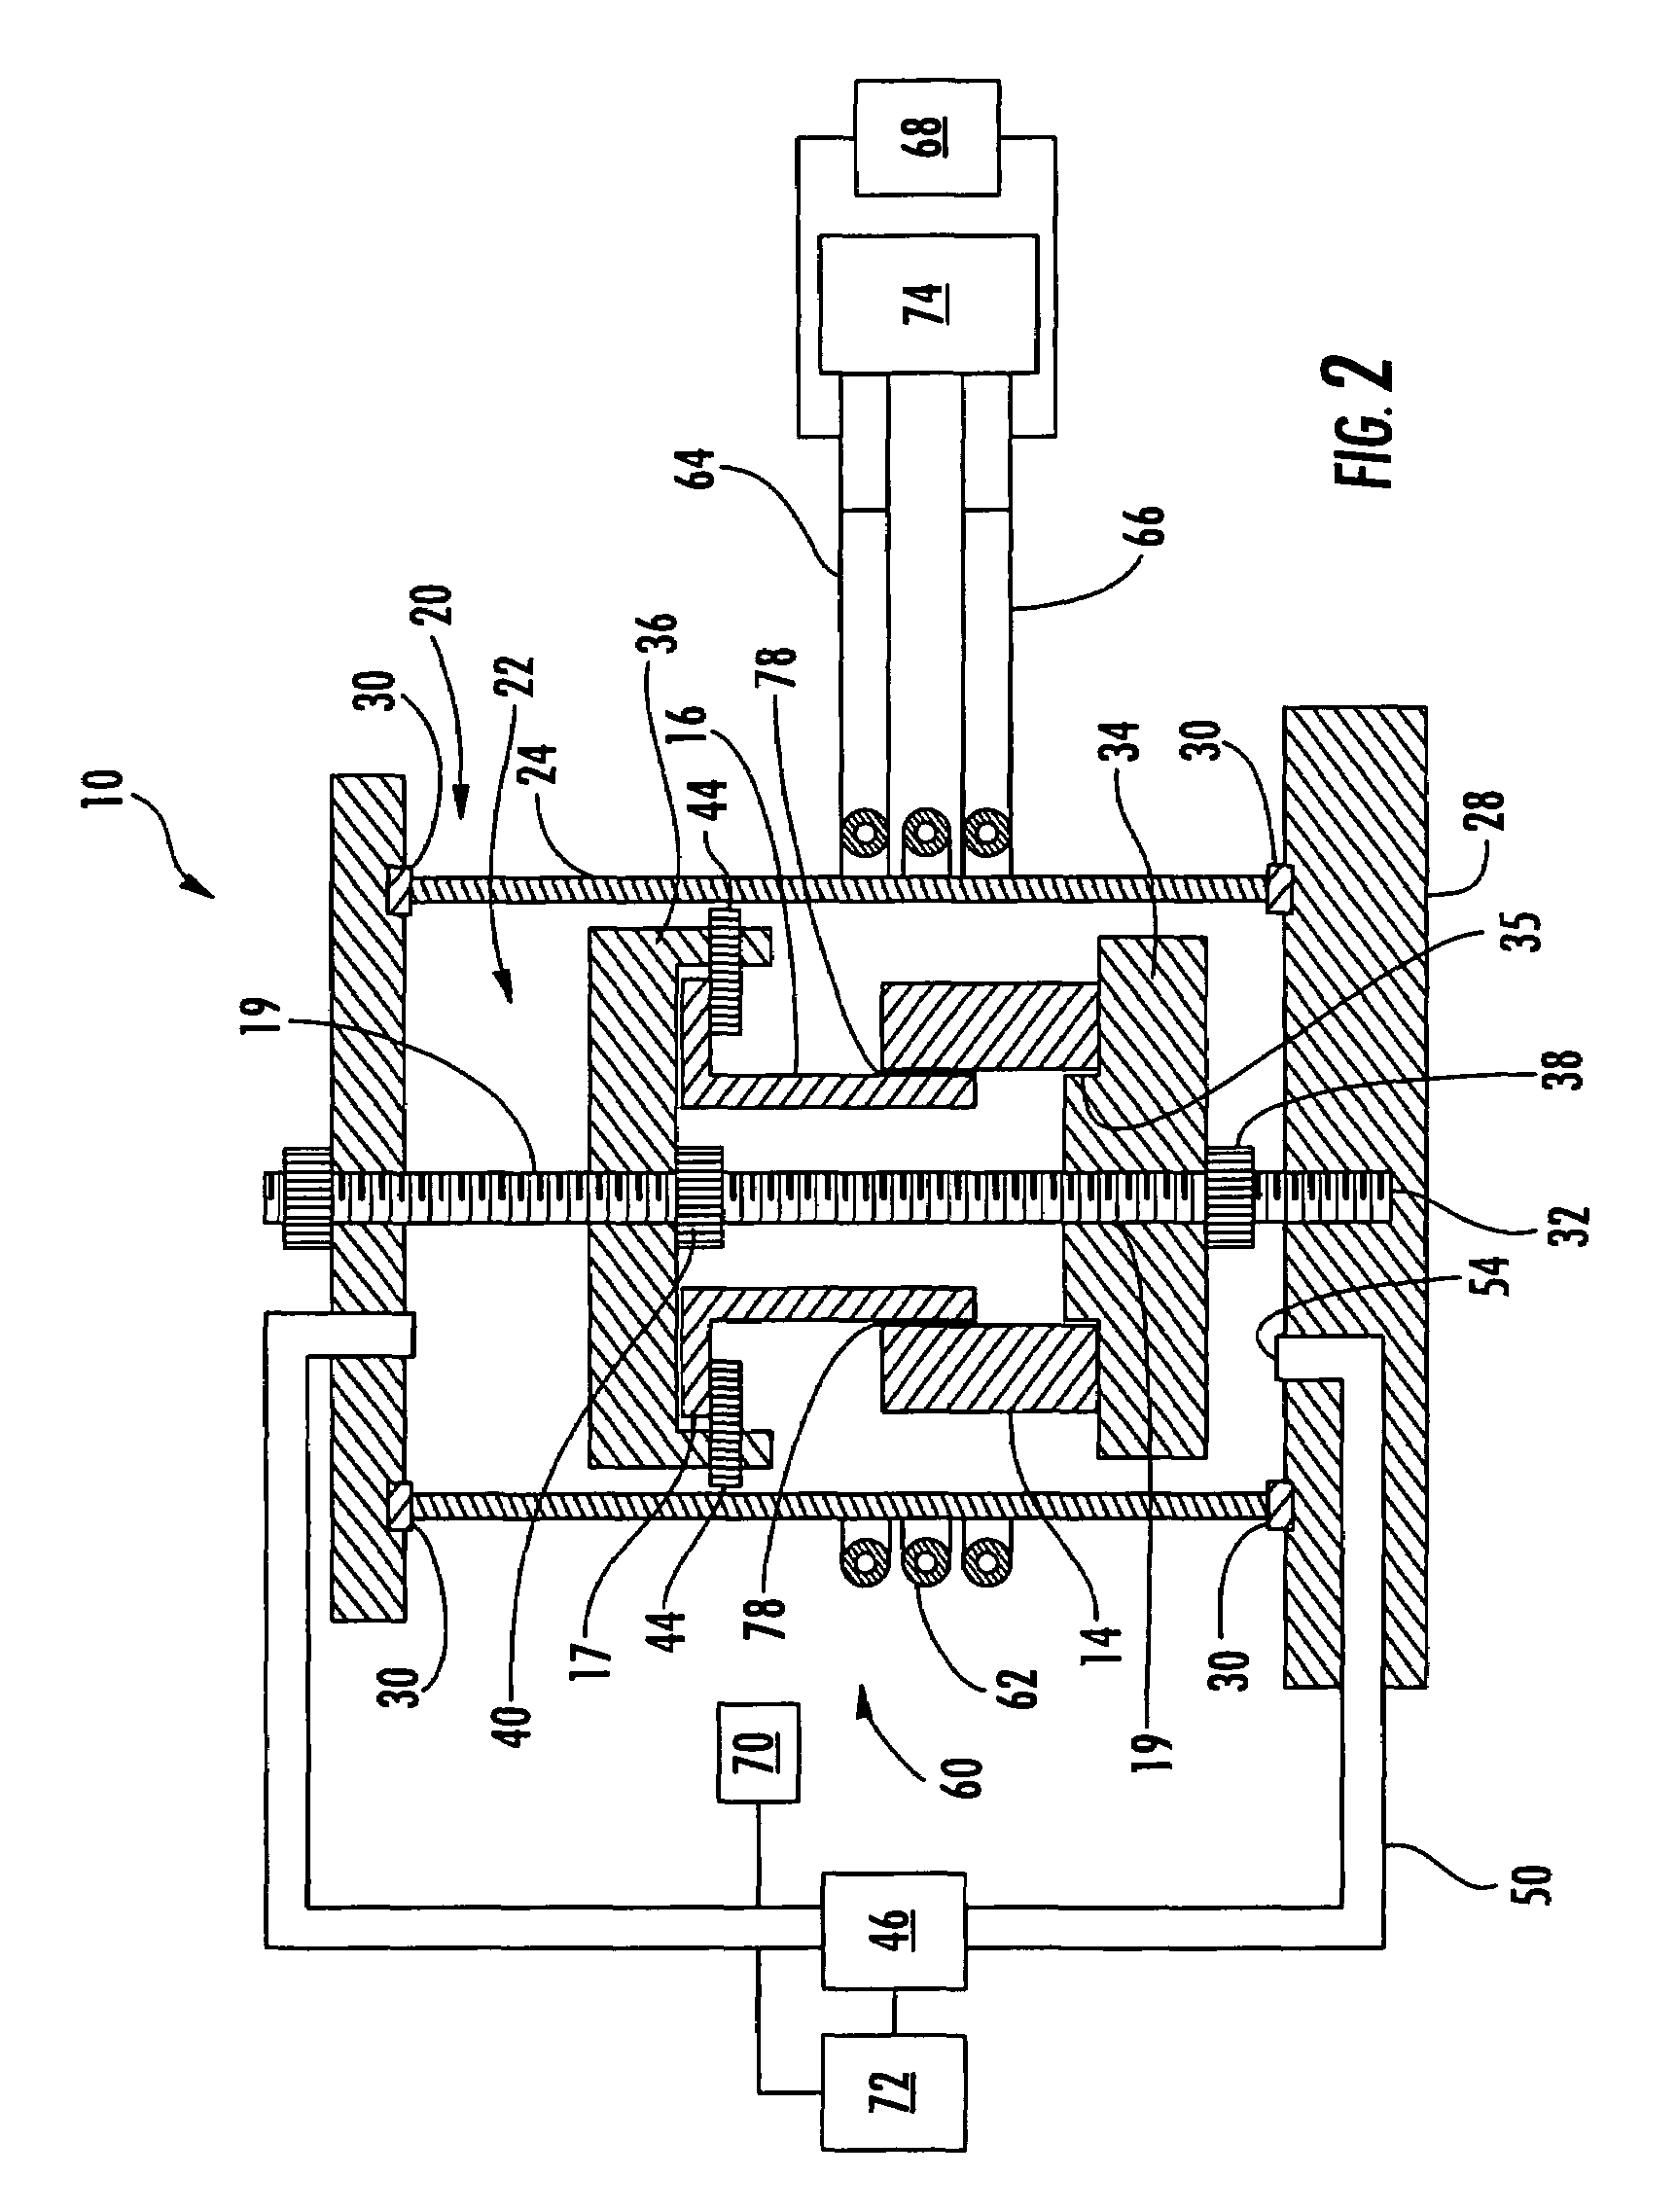 Brazed structural assembly and associated system and method for manufacture